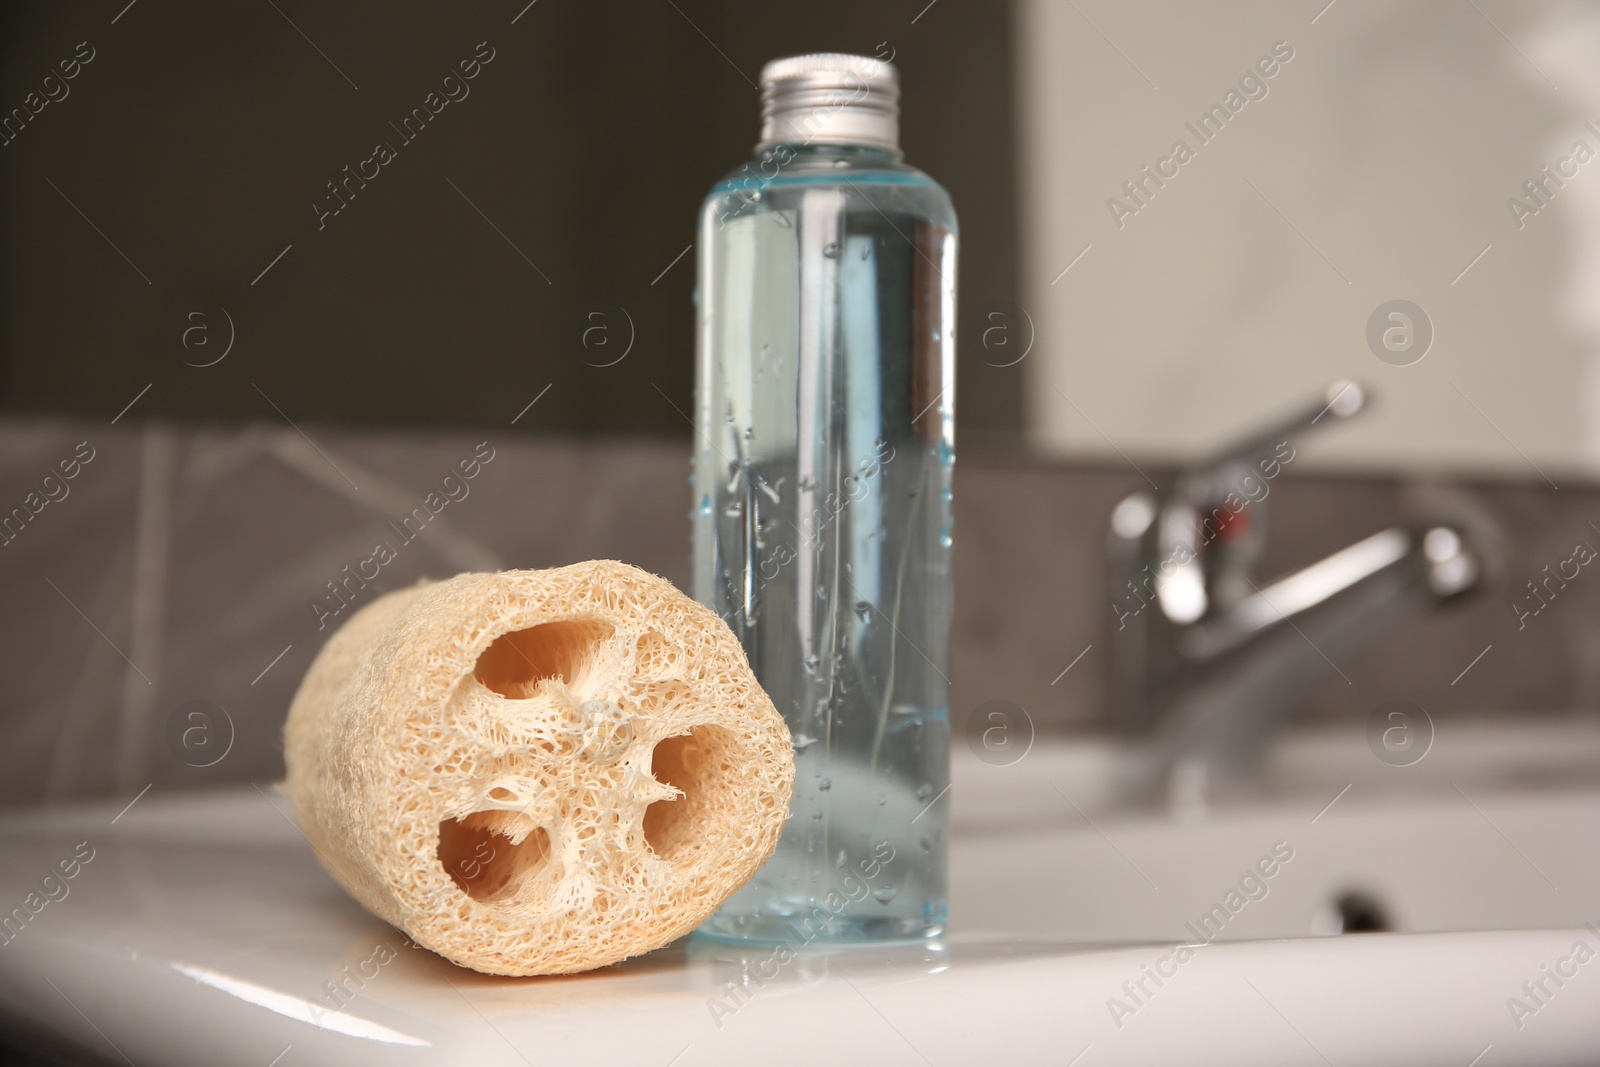 Photo of Natural loofah sponge and bottle with shower gel on washbasin in bathroom, closeup